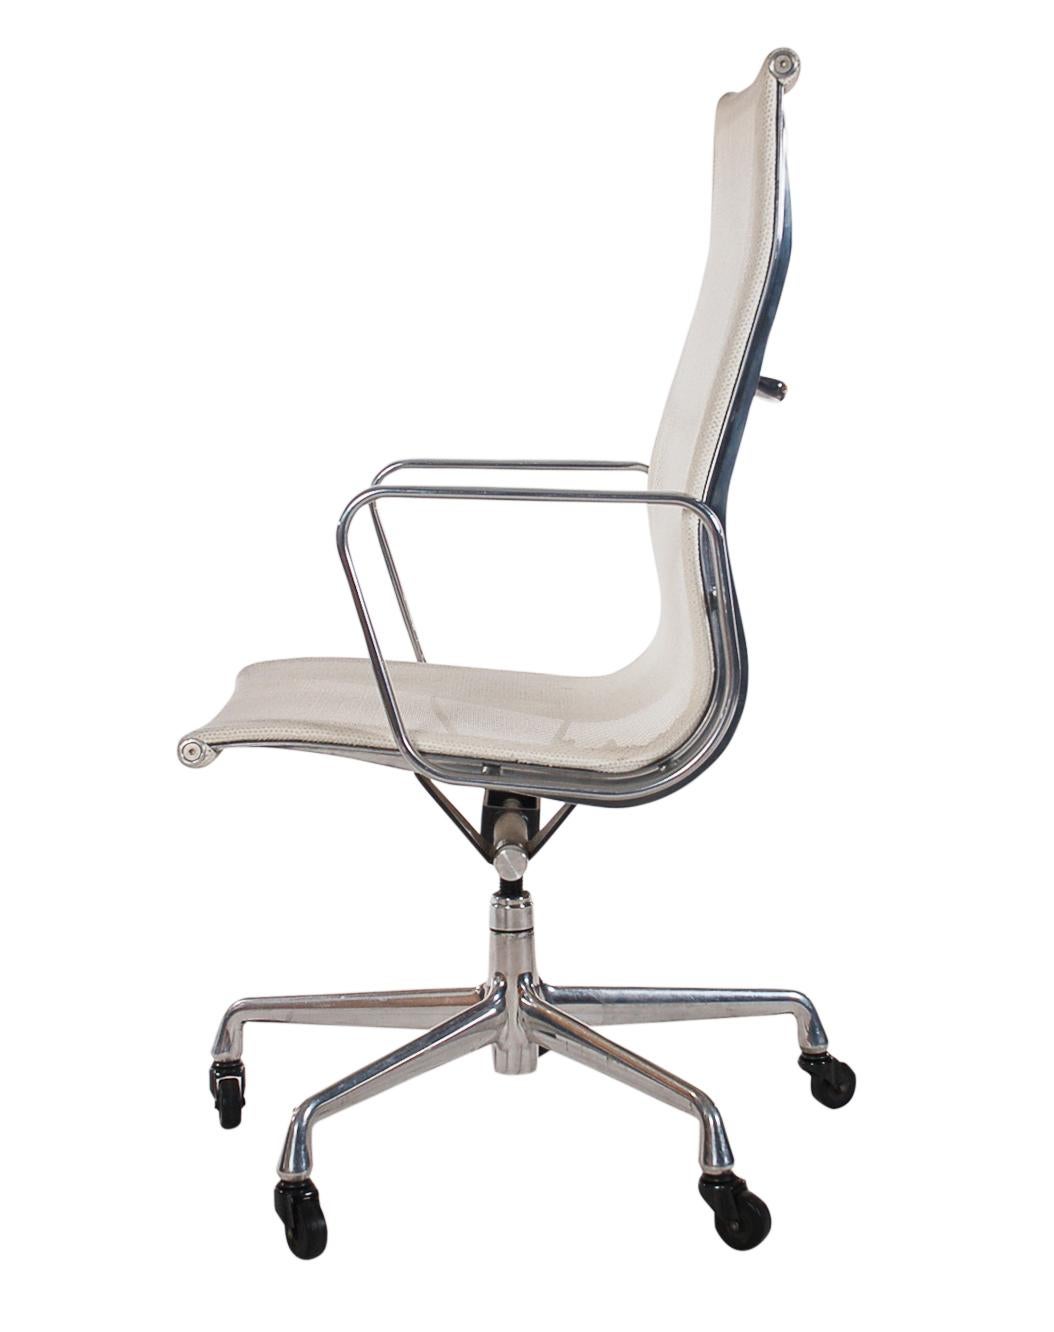 Complete set of 6 modern conference chairs or office chairs by Charles Eames and produced by Herman Miller. These chairs features an adjustable aluminum frame, casters for easy tasking, and a white mesh sling seating area. Extremely comfortable.